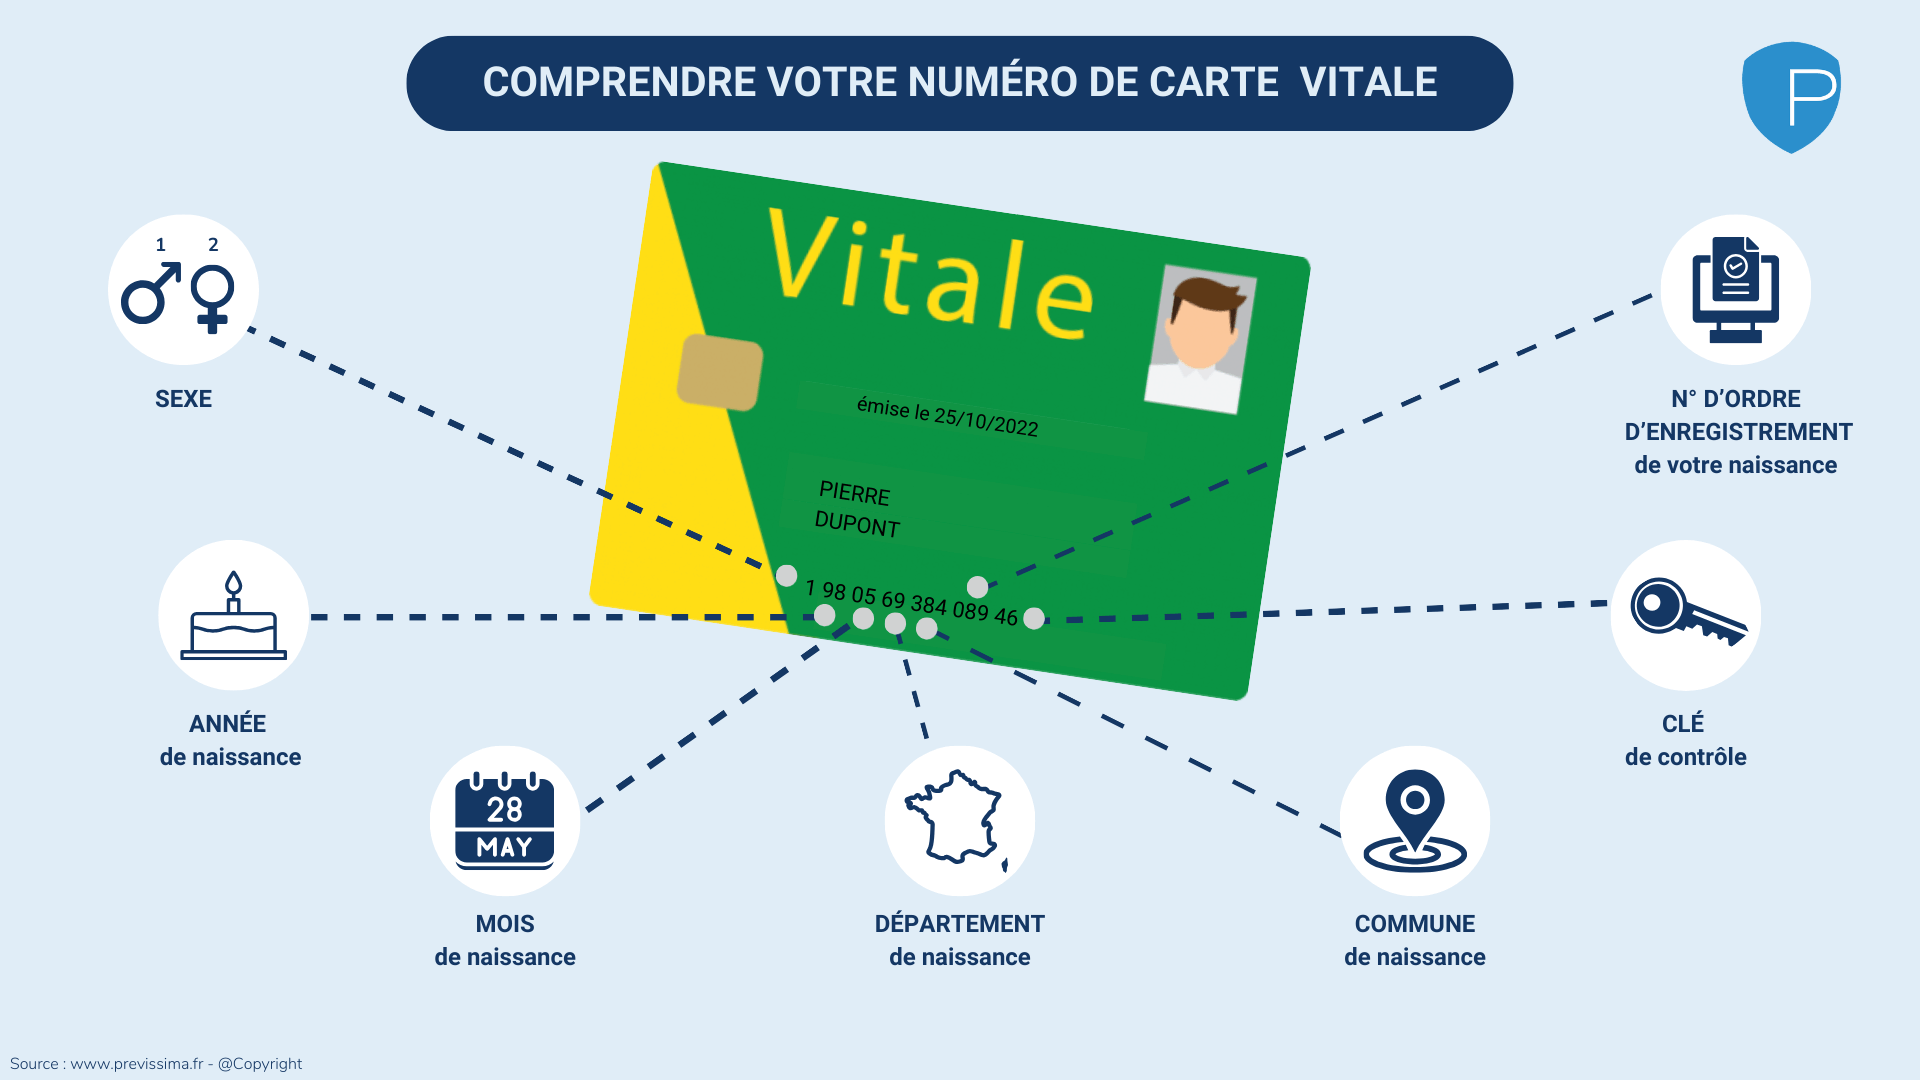 Carte vitale (French social security card) - Understanding the social security number